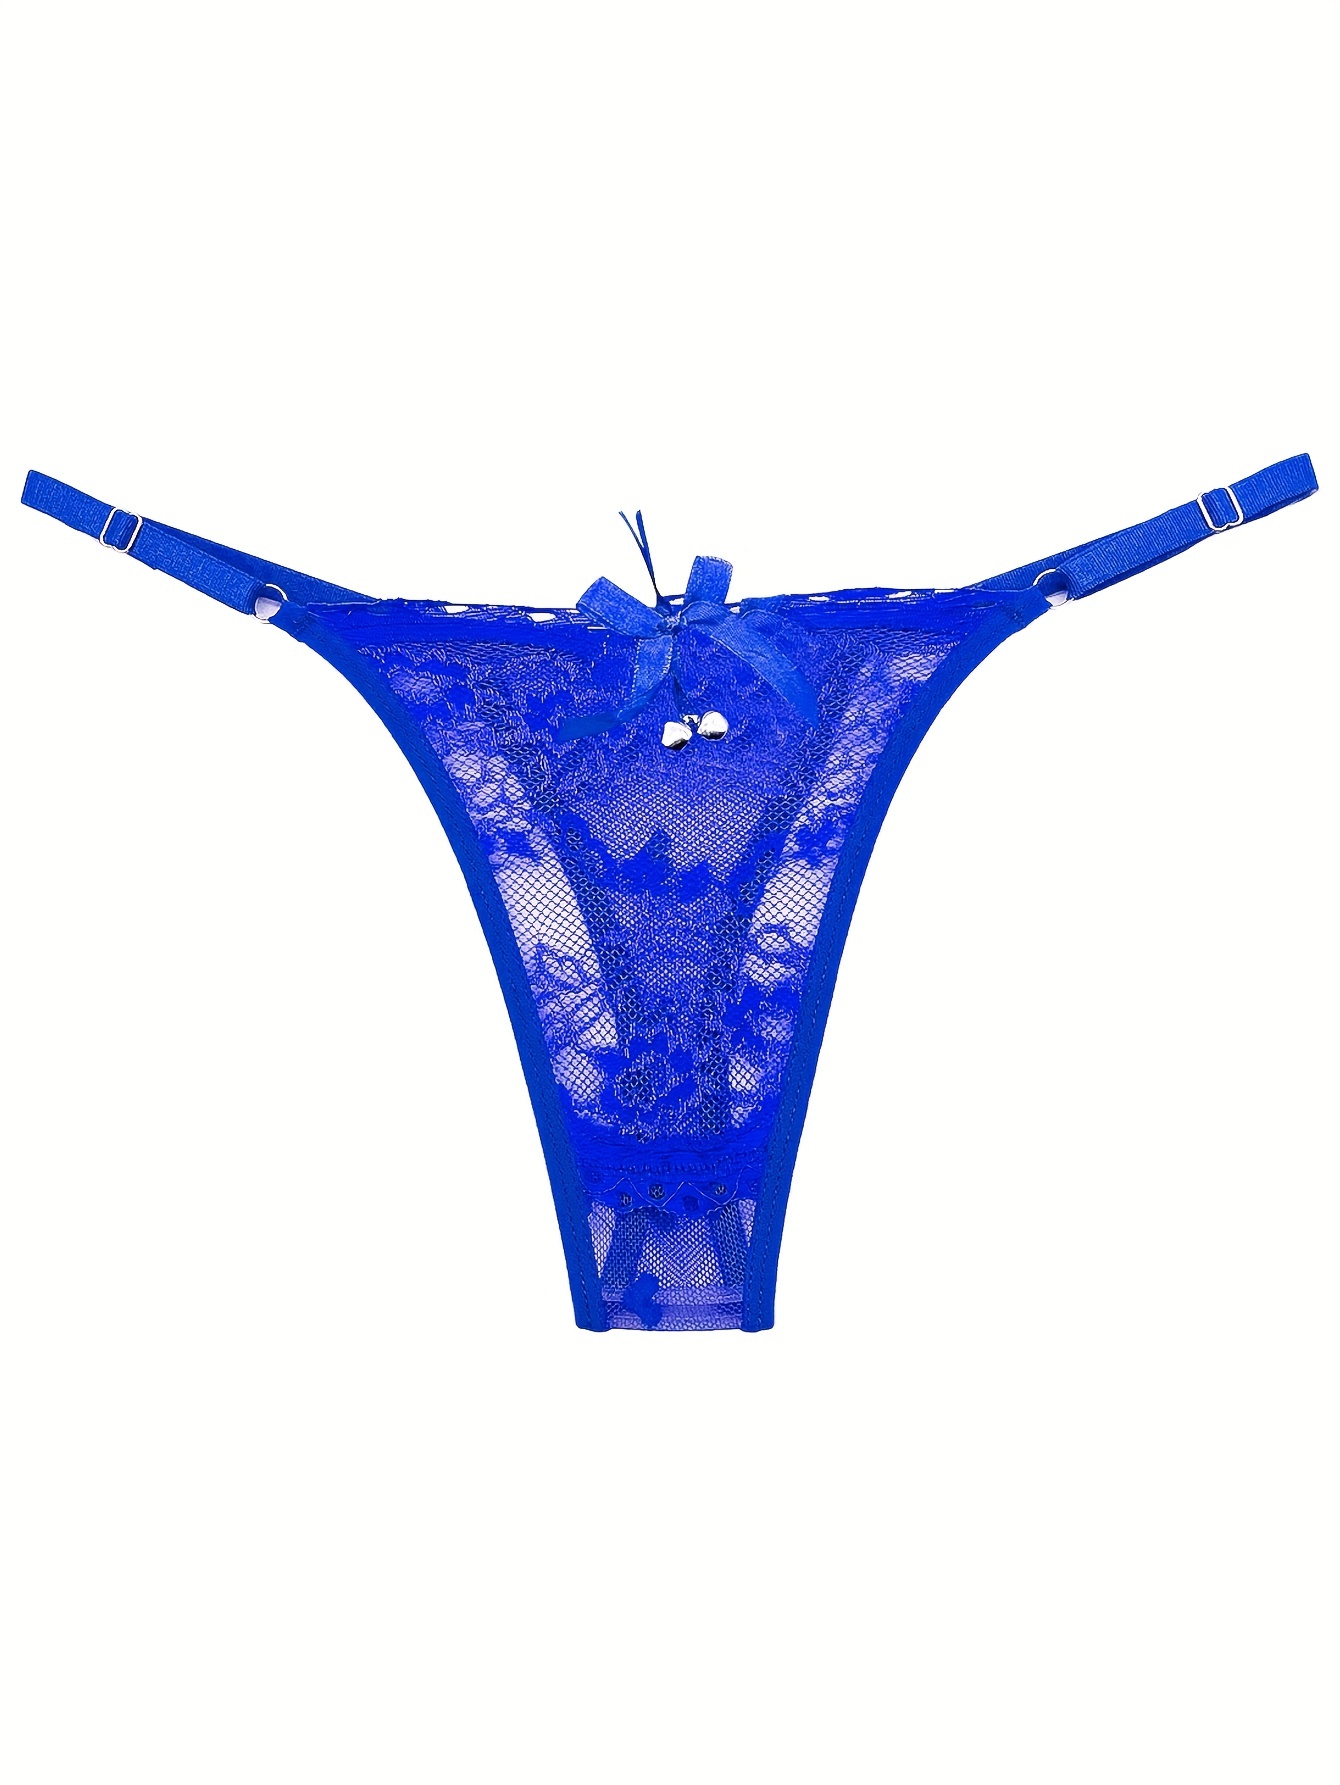 Ladies' Hollow Out Thong Panties With Bow Decor